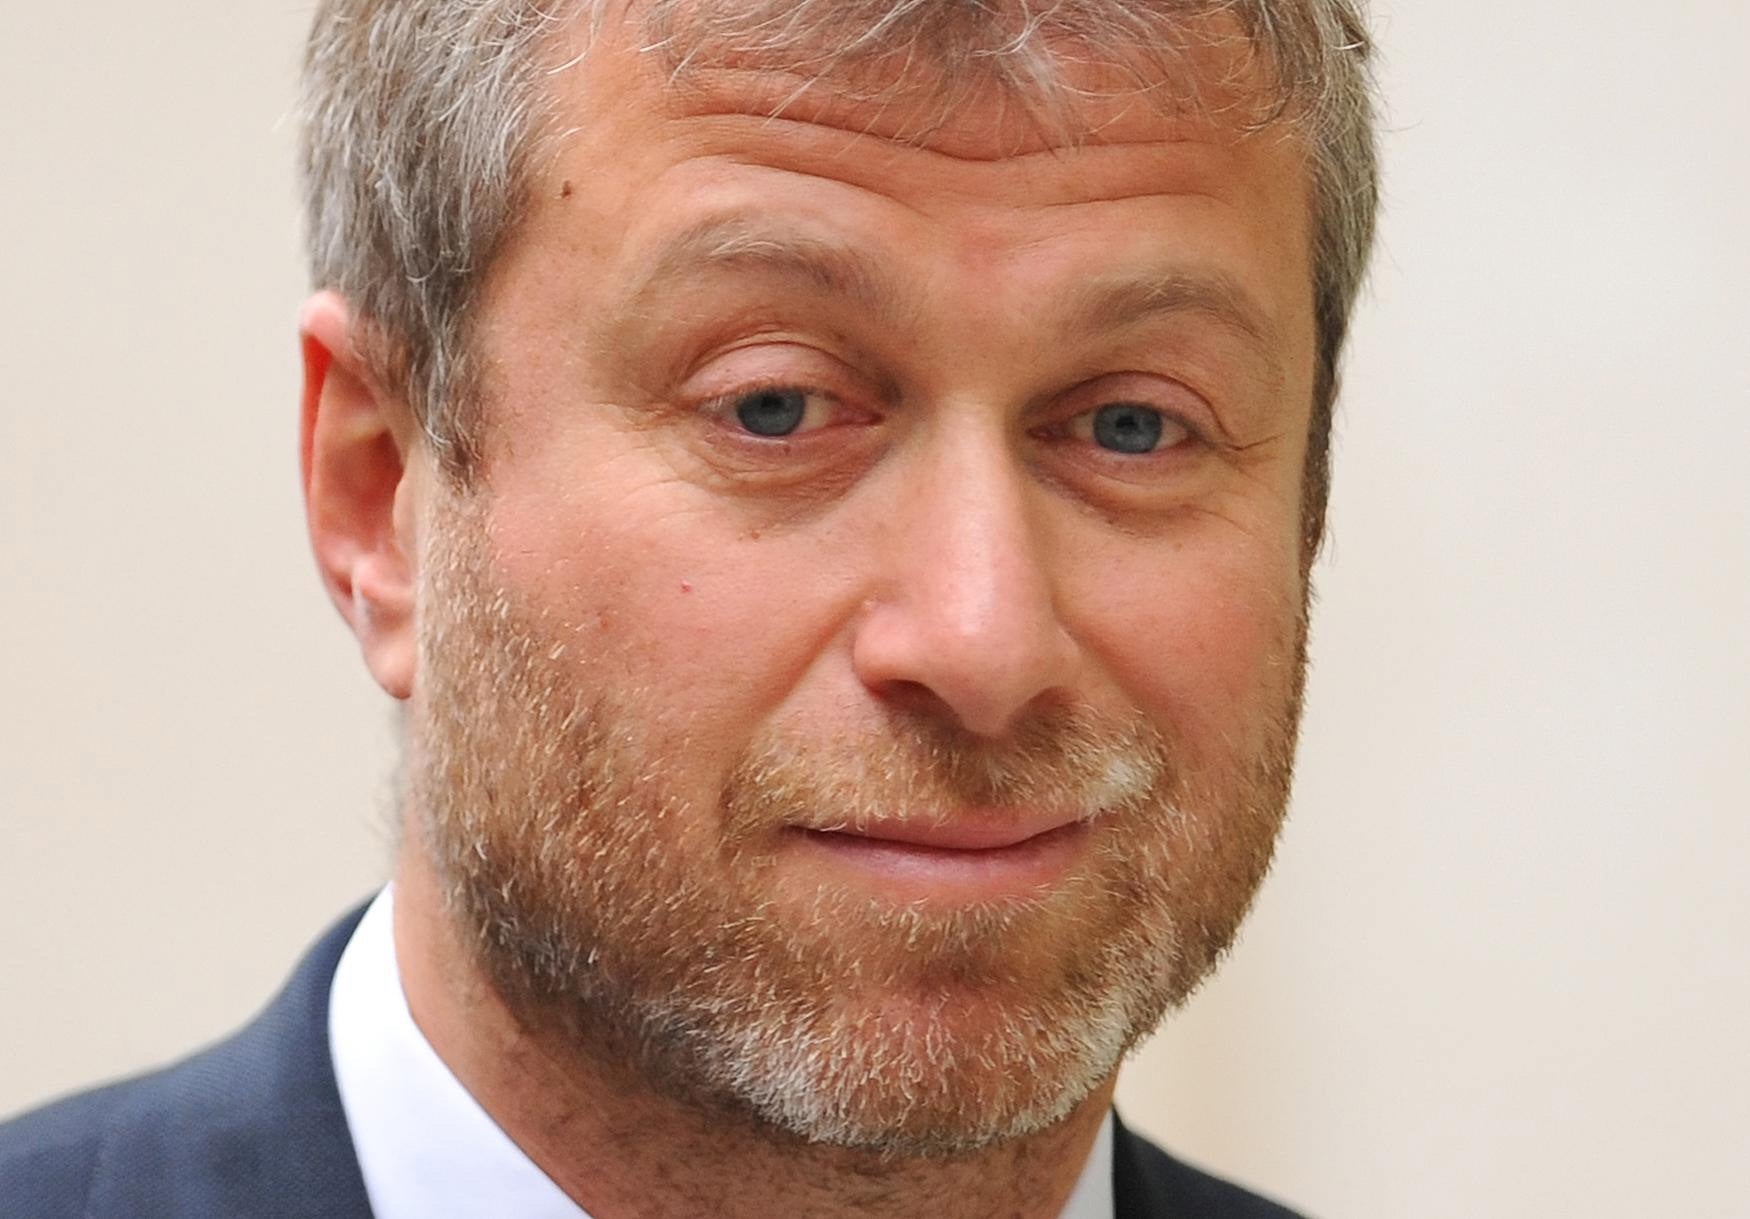 Roman Abramovich will sell Chelsea after 19 years owning the Stamford Bridge club